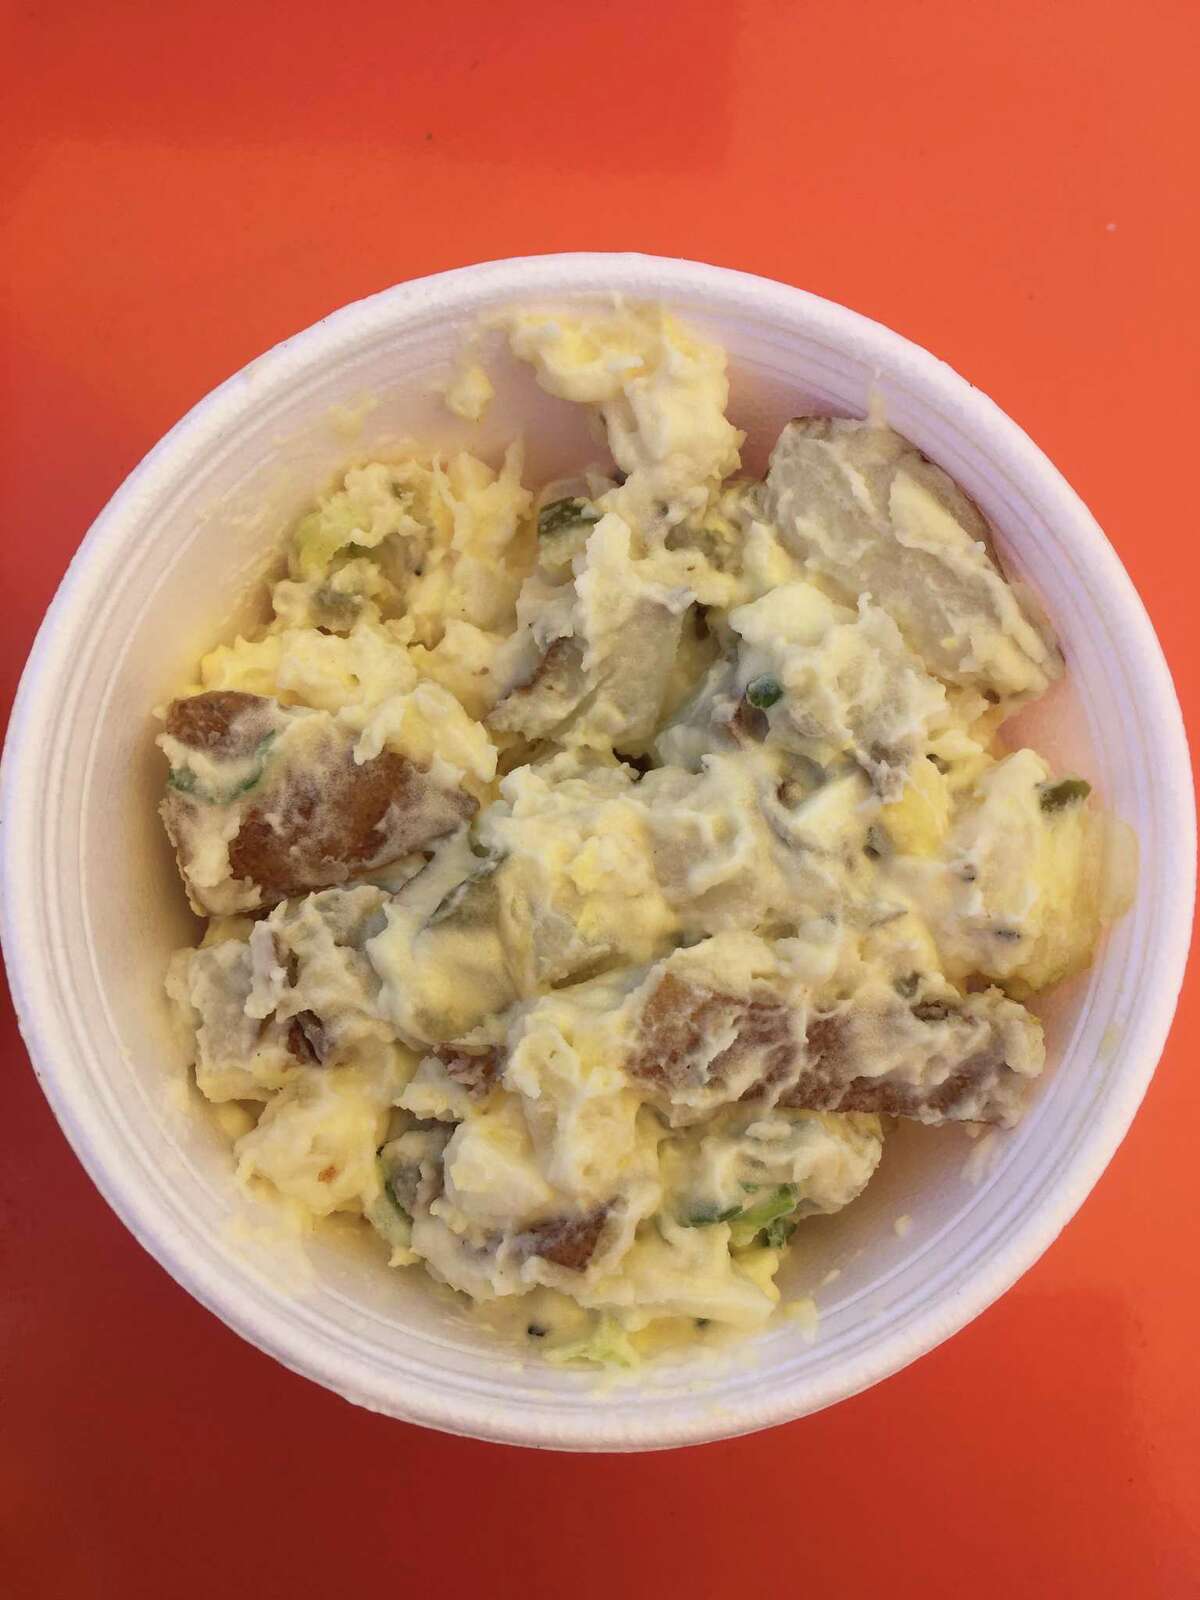 Sides at Nano's BBQ include a flavorful potato salad.